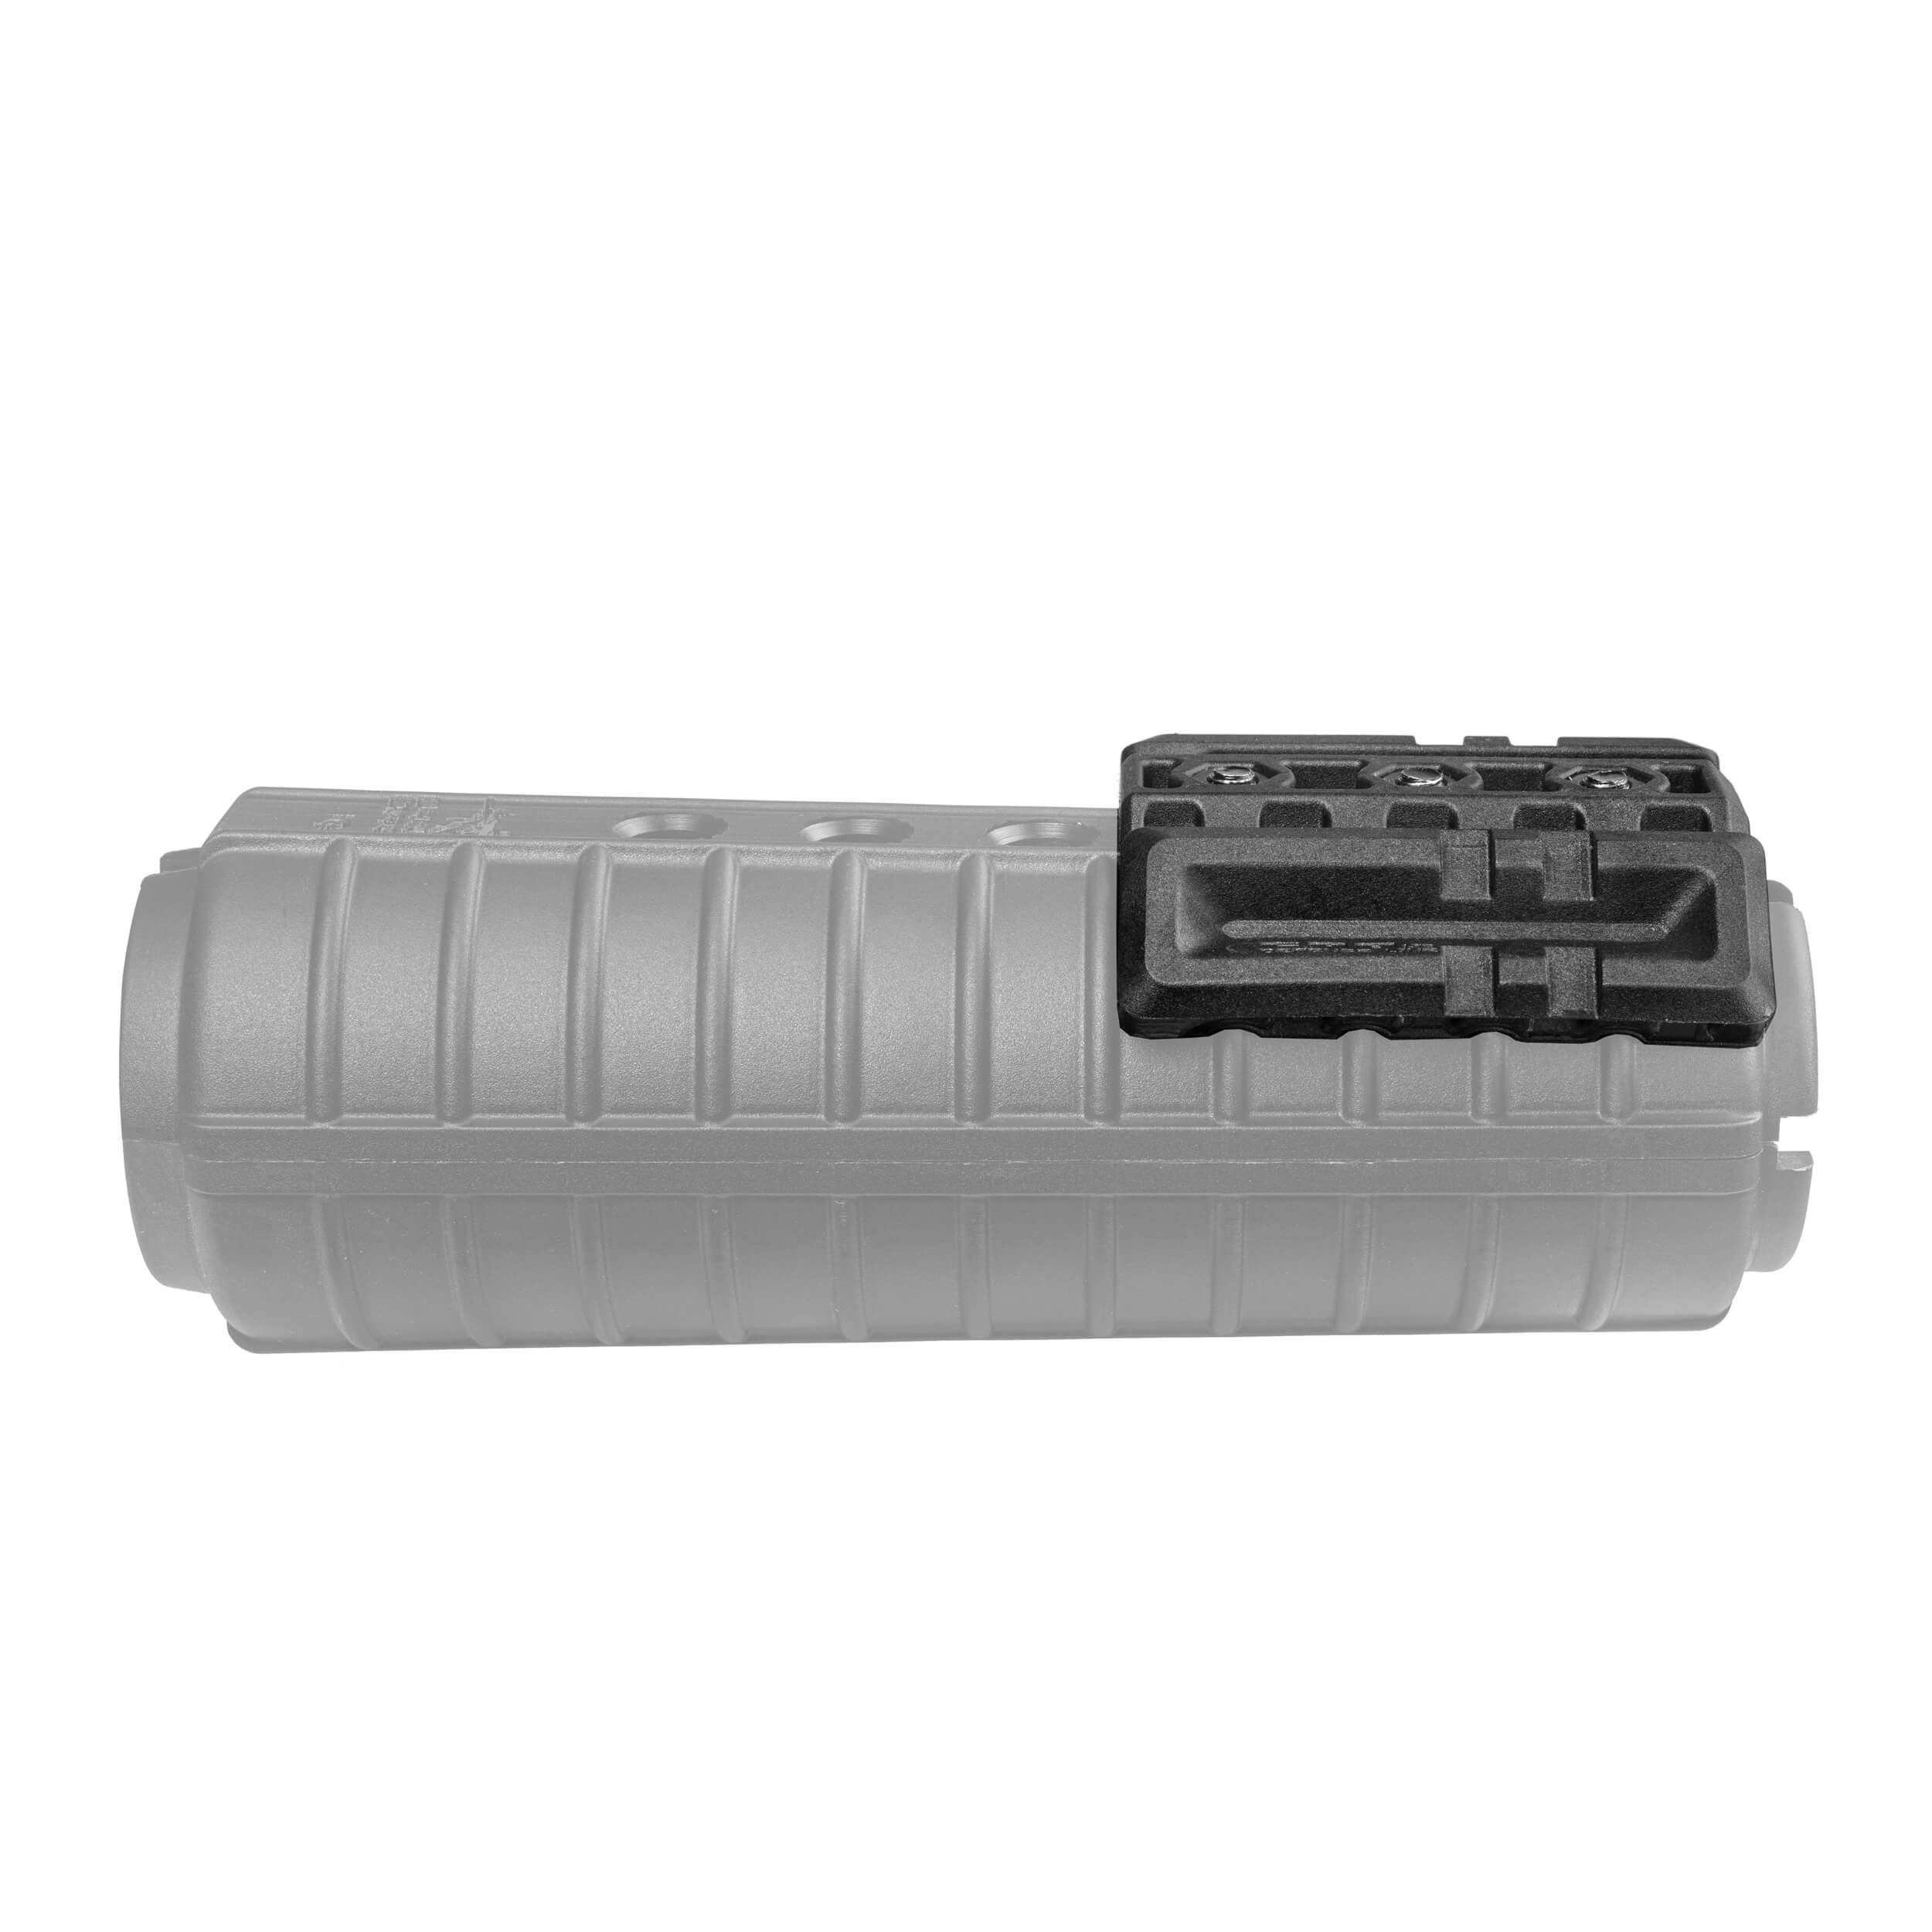 M16 / M4 / AR-15 Double Offset Polymer Accessory Rail